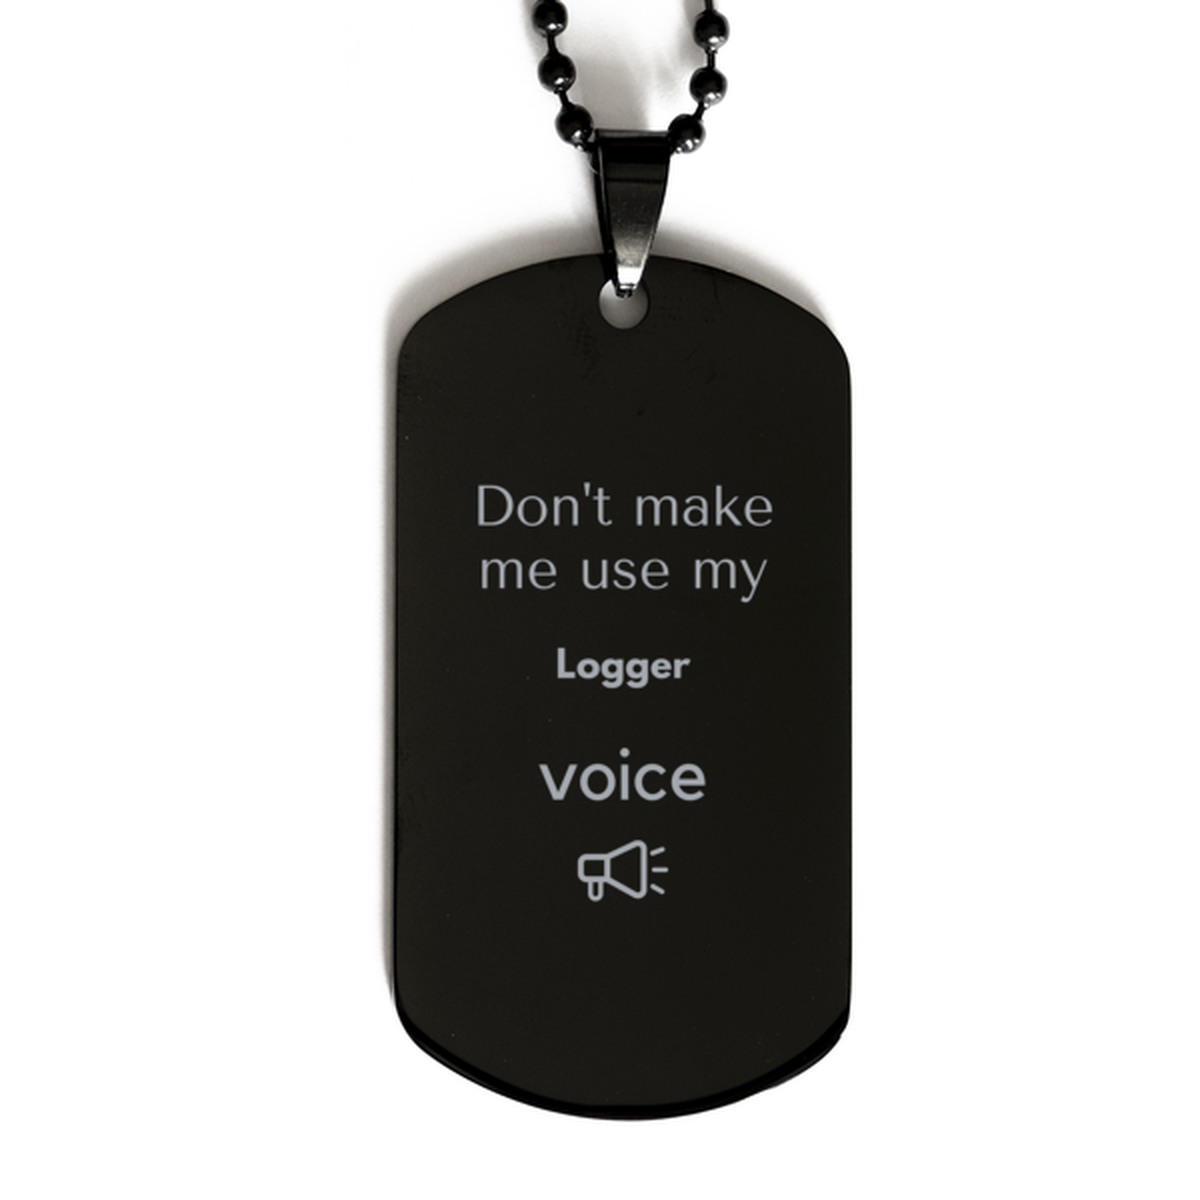 Don't make me use my Logger voice, Sarcasm Logger Gifts, Christmas Logger Black Dog Tag Birthday Unique Gifts For Logger Coworkers, Men, Women, Colleague, Friends